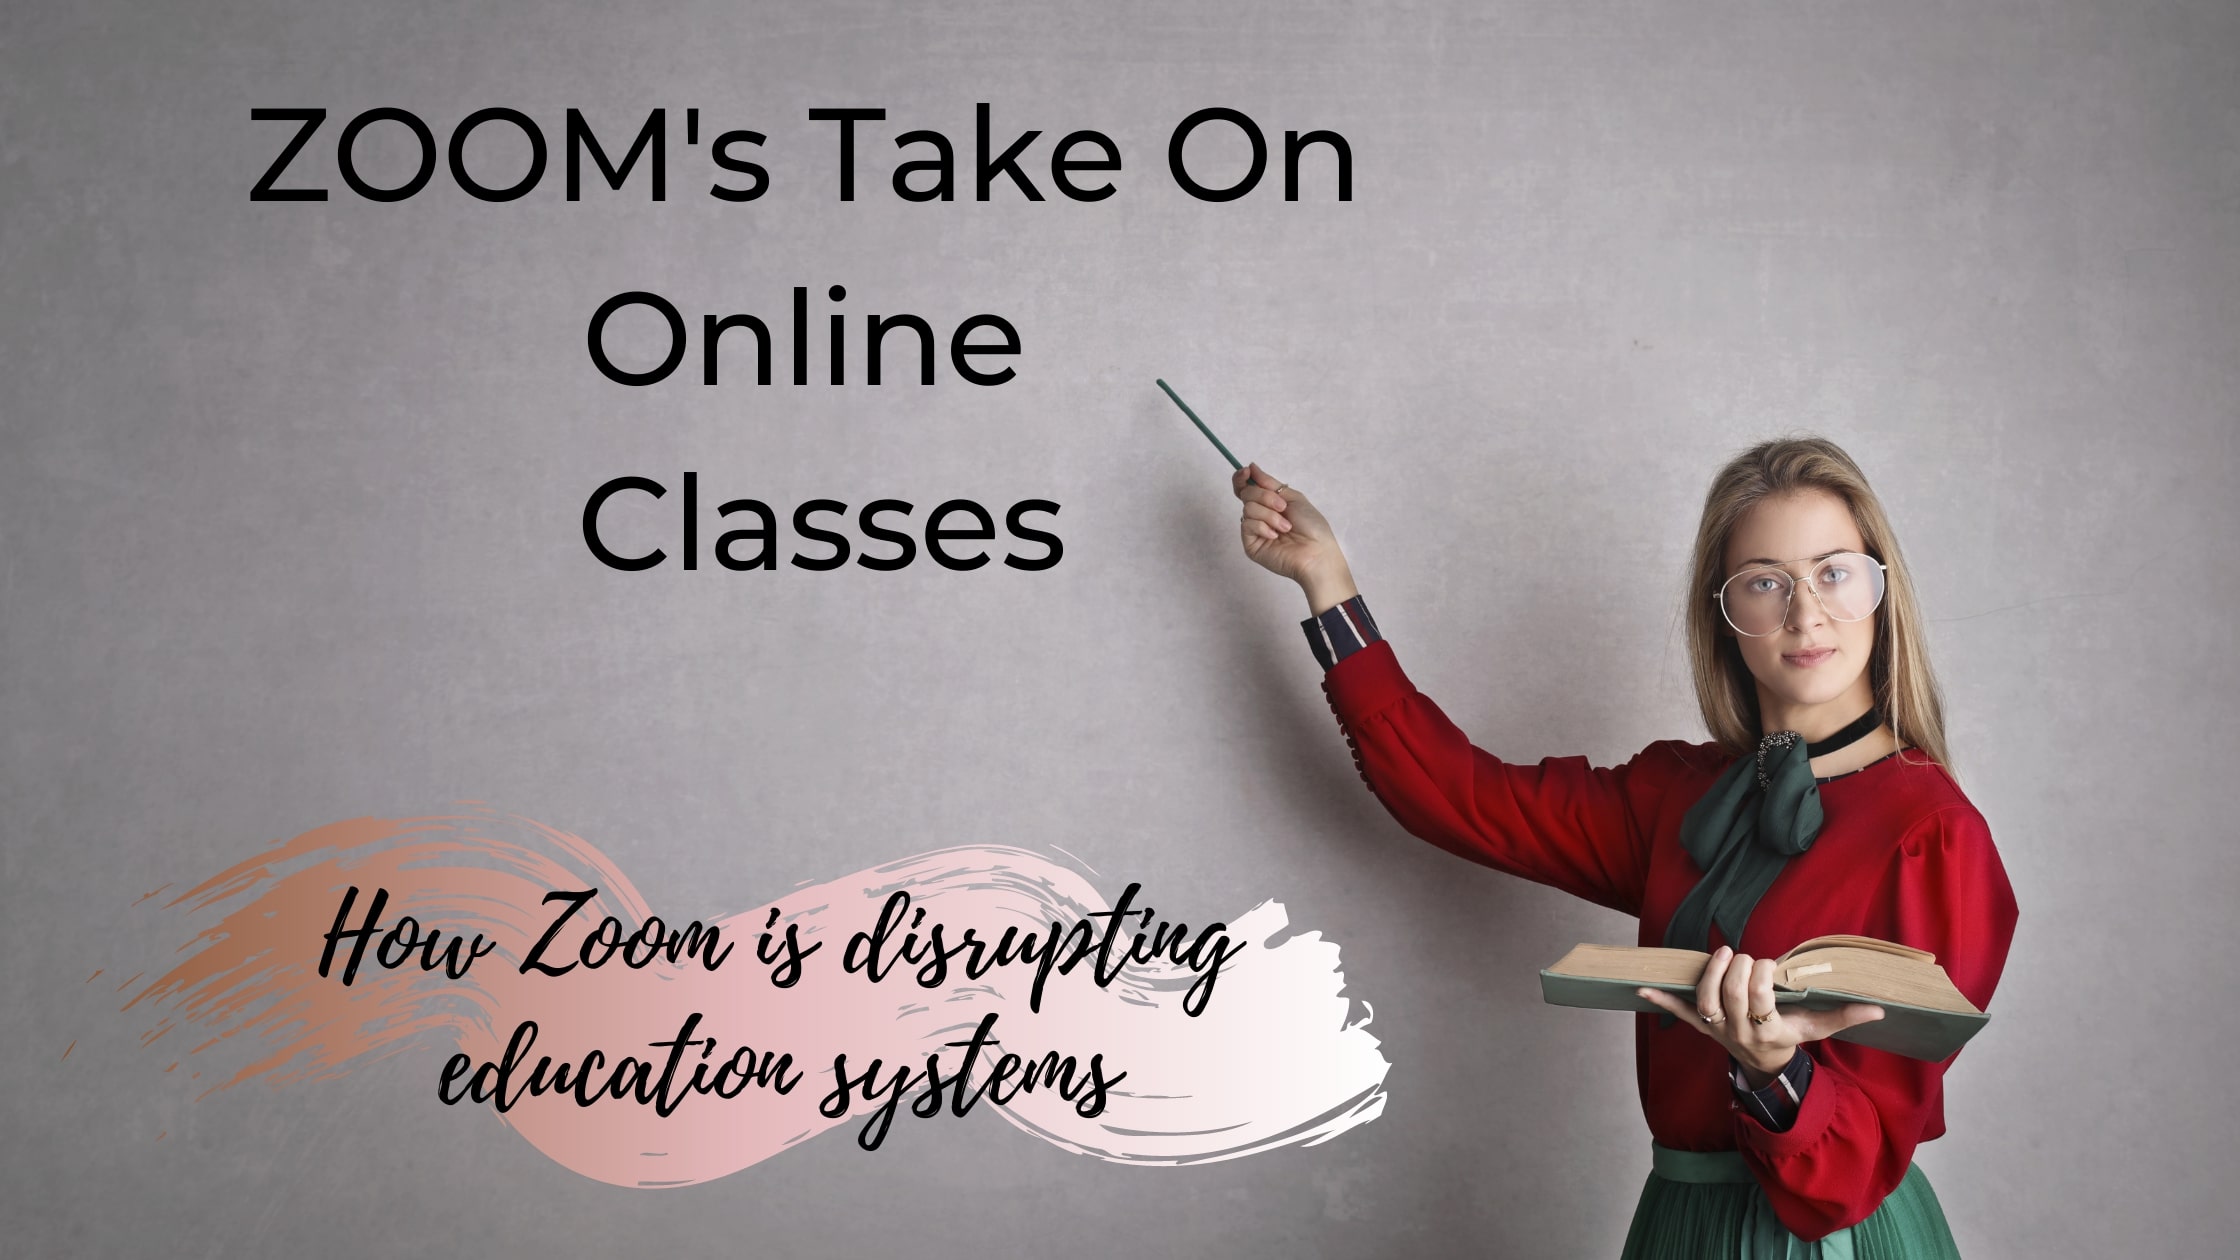 zoom’s take on education systems